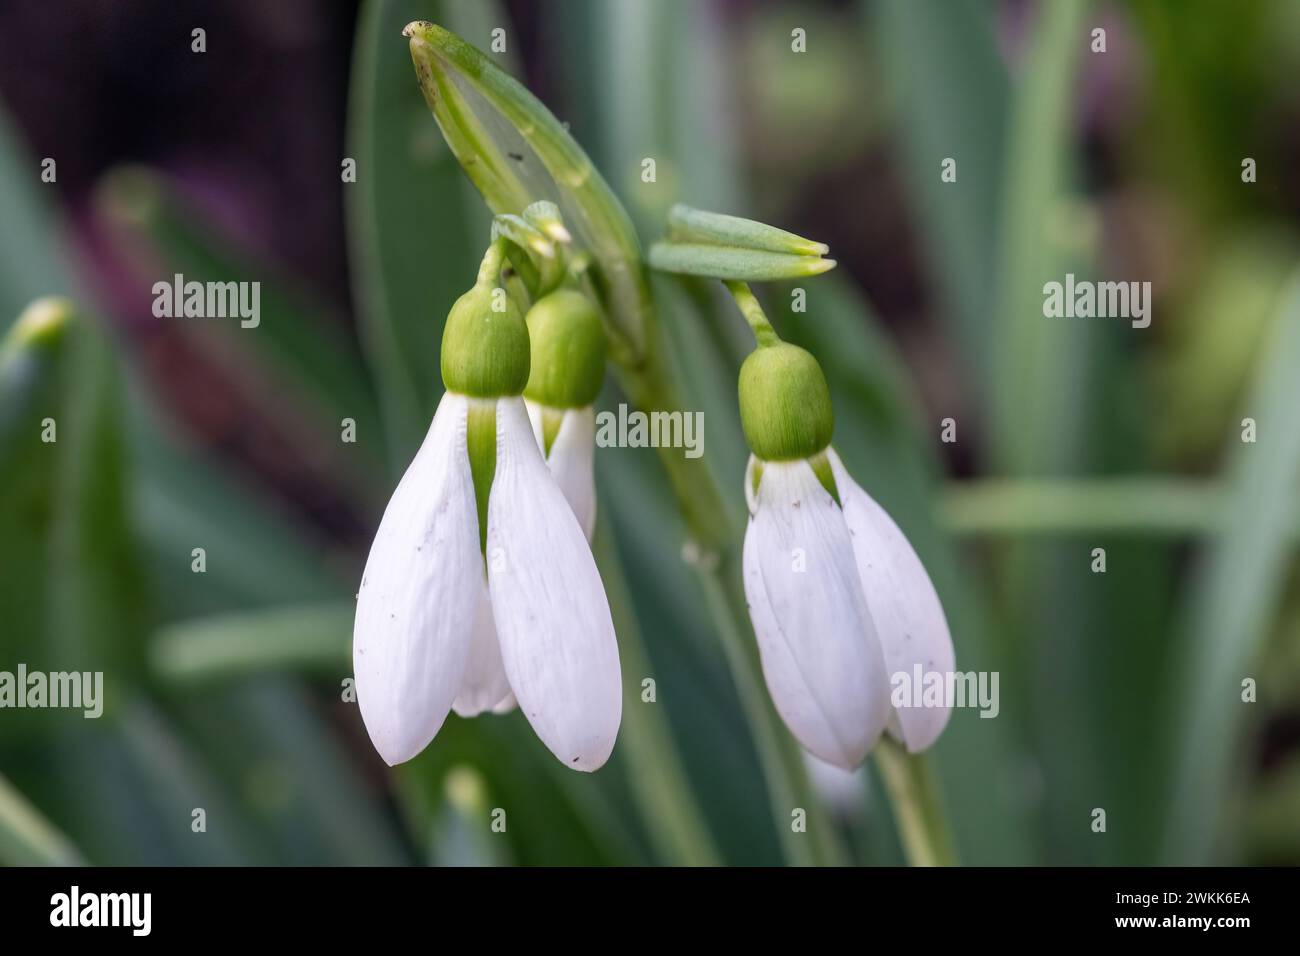 Galanthus 'Trotter's Merlin' snowdrop variety snowdrops flowering during February, England, UK Stock Photo